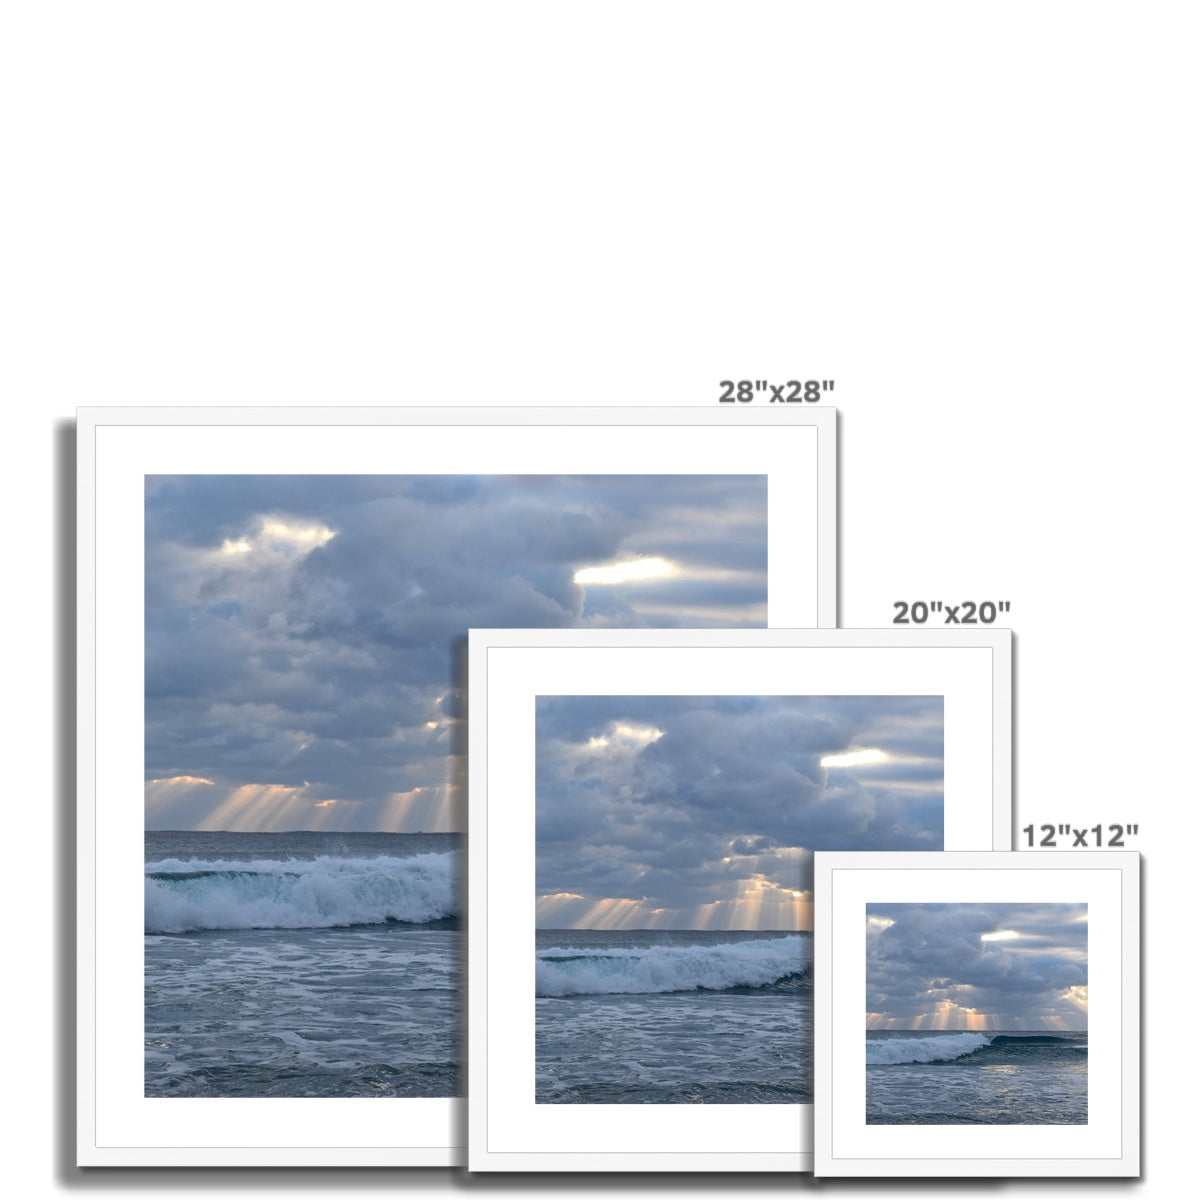  Clouds waves rays square sizes matted framed print by jacqueline mb designs 